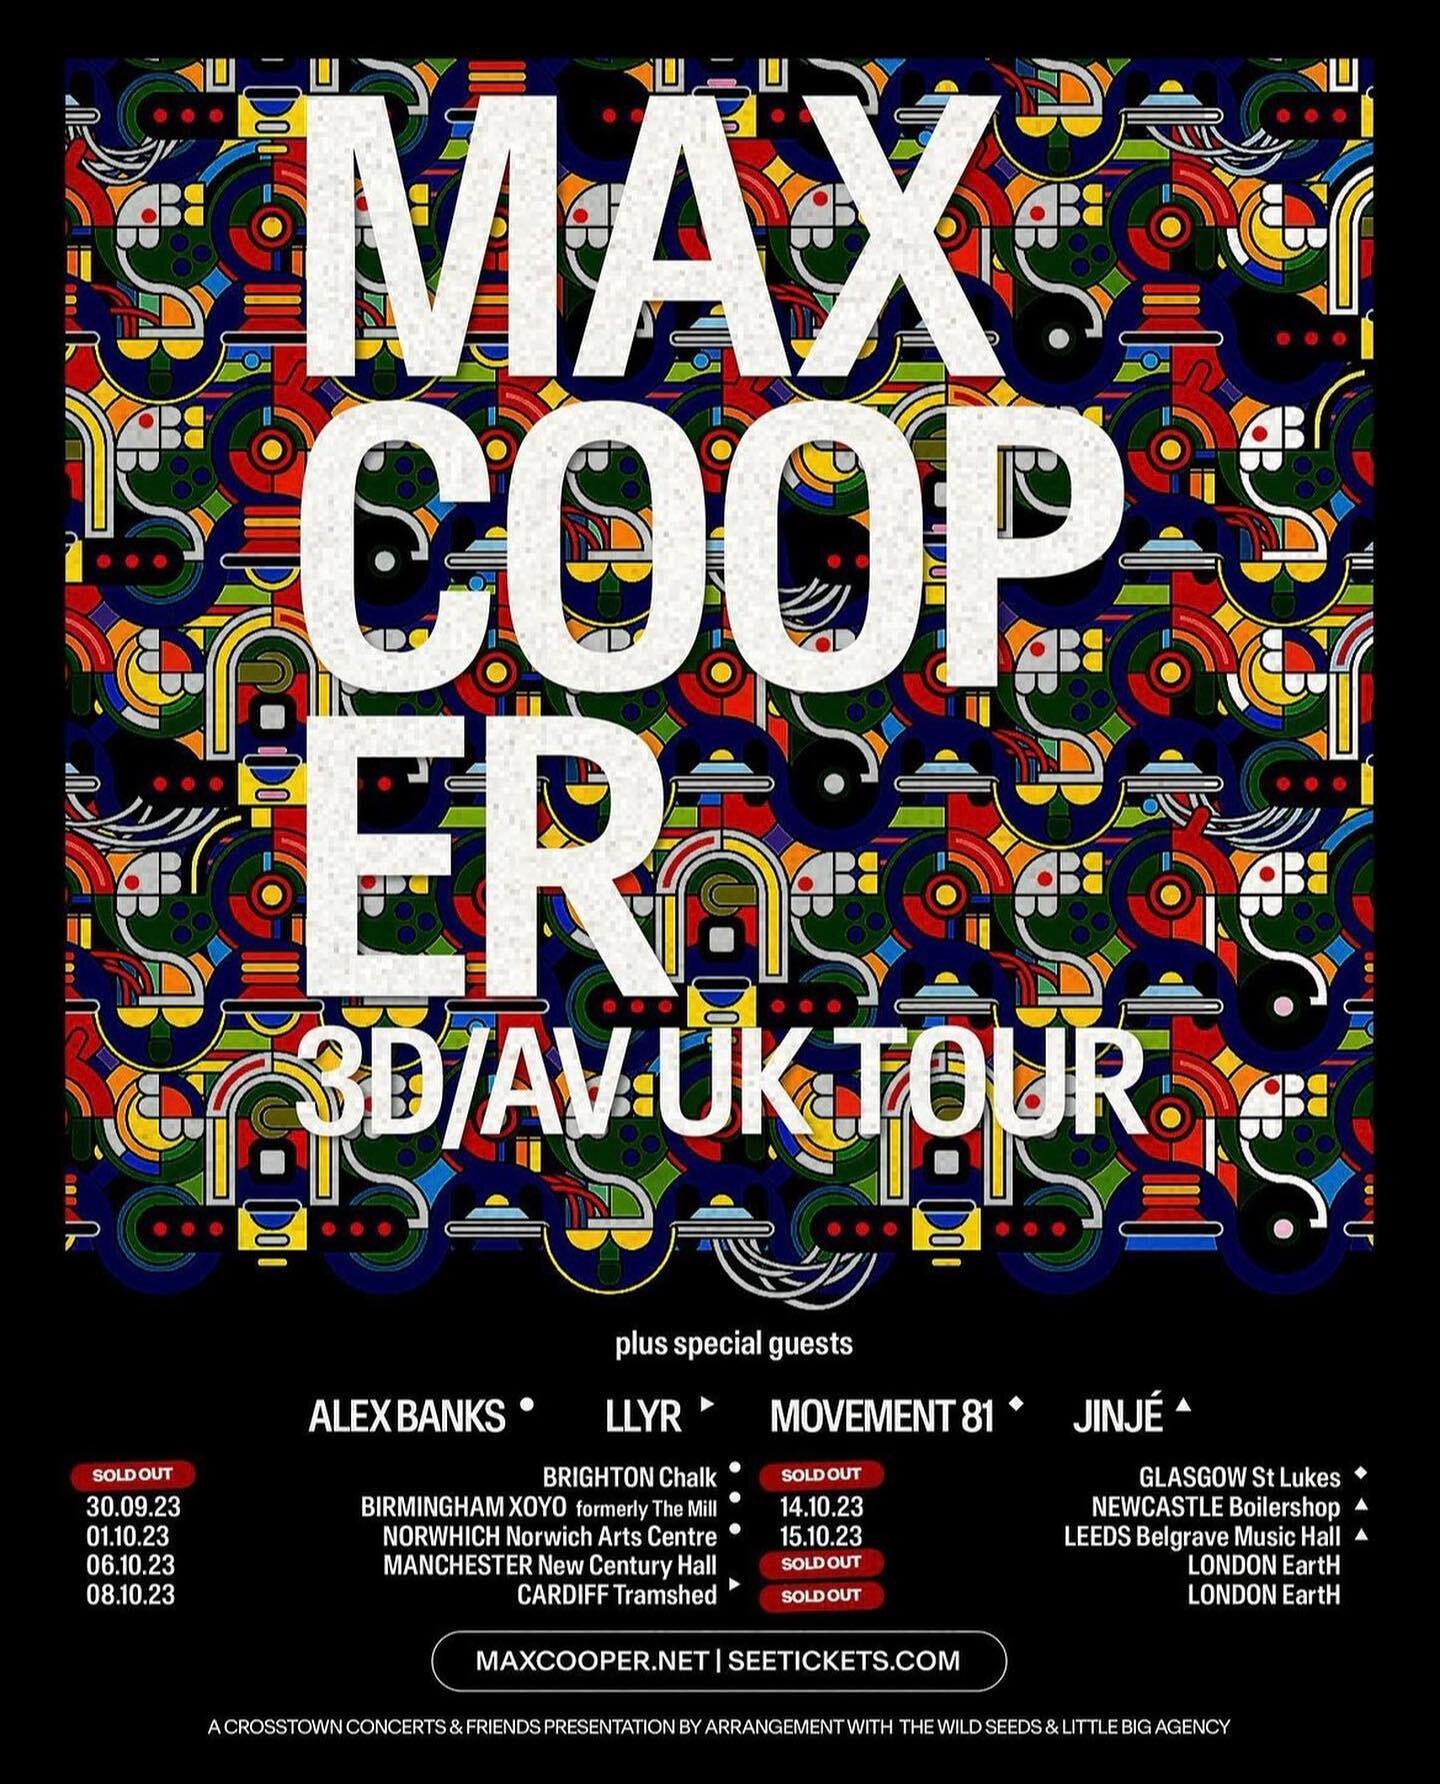 /// ᴜᴋ ᴛᴏᴜʀ ᴡɪᴛʜ ᴍᴀx ᴄᴏᴏᴘᴇʀ ///

I&rsquo;m excited to announce I'll be playing live, supporting the legendary Max Cooper on three dates of his upcoming UK tour.

29 Sept - Brighton, Chalk (SOLD OUT)
30 Sept - Birmingham, XOYO / The Mill 
1 Oct - Norw